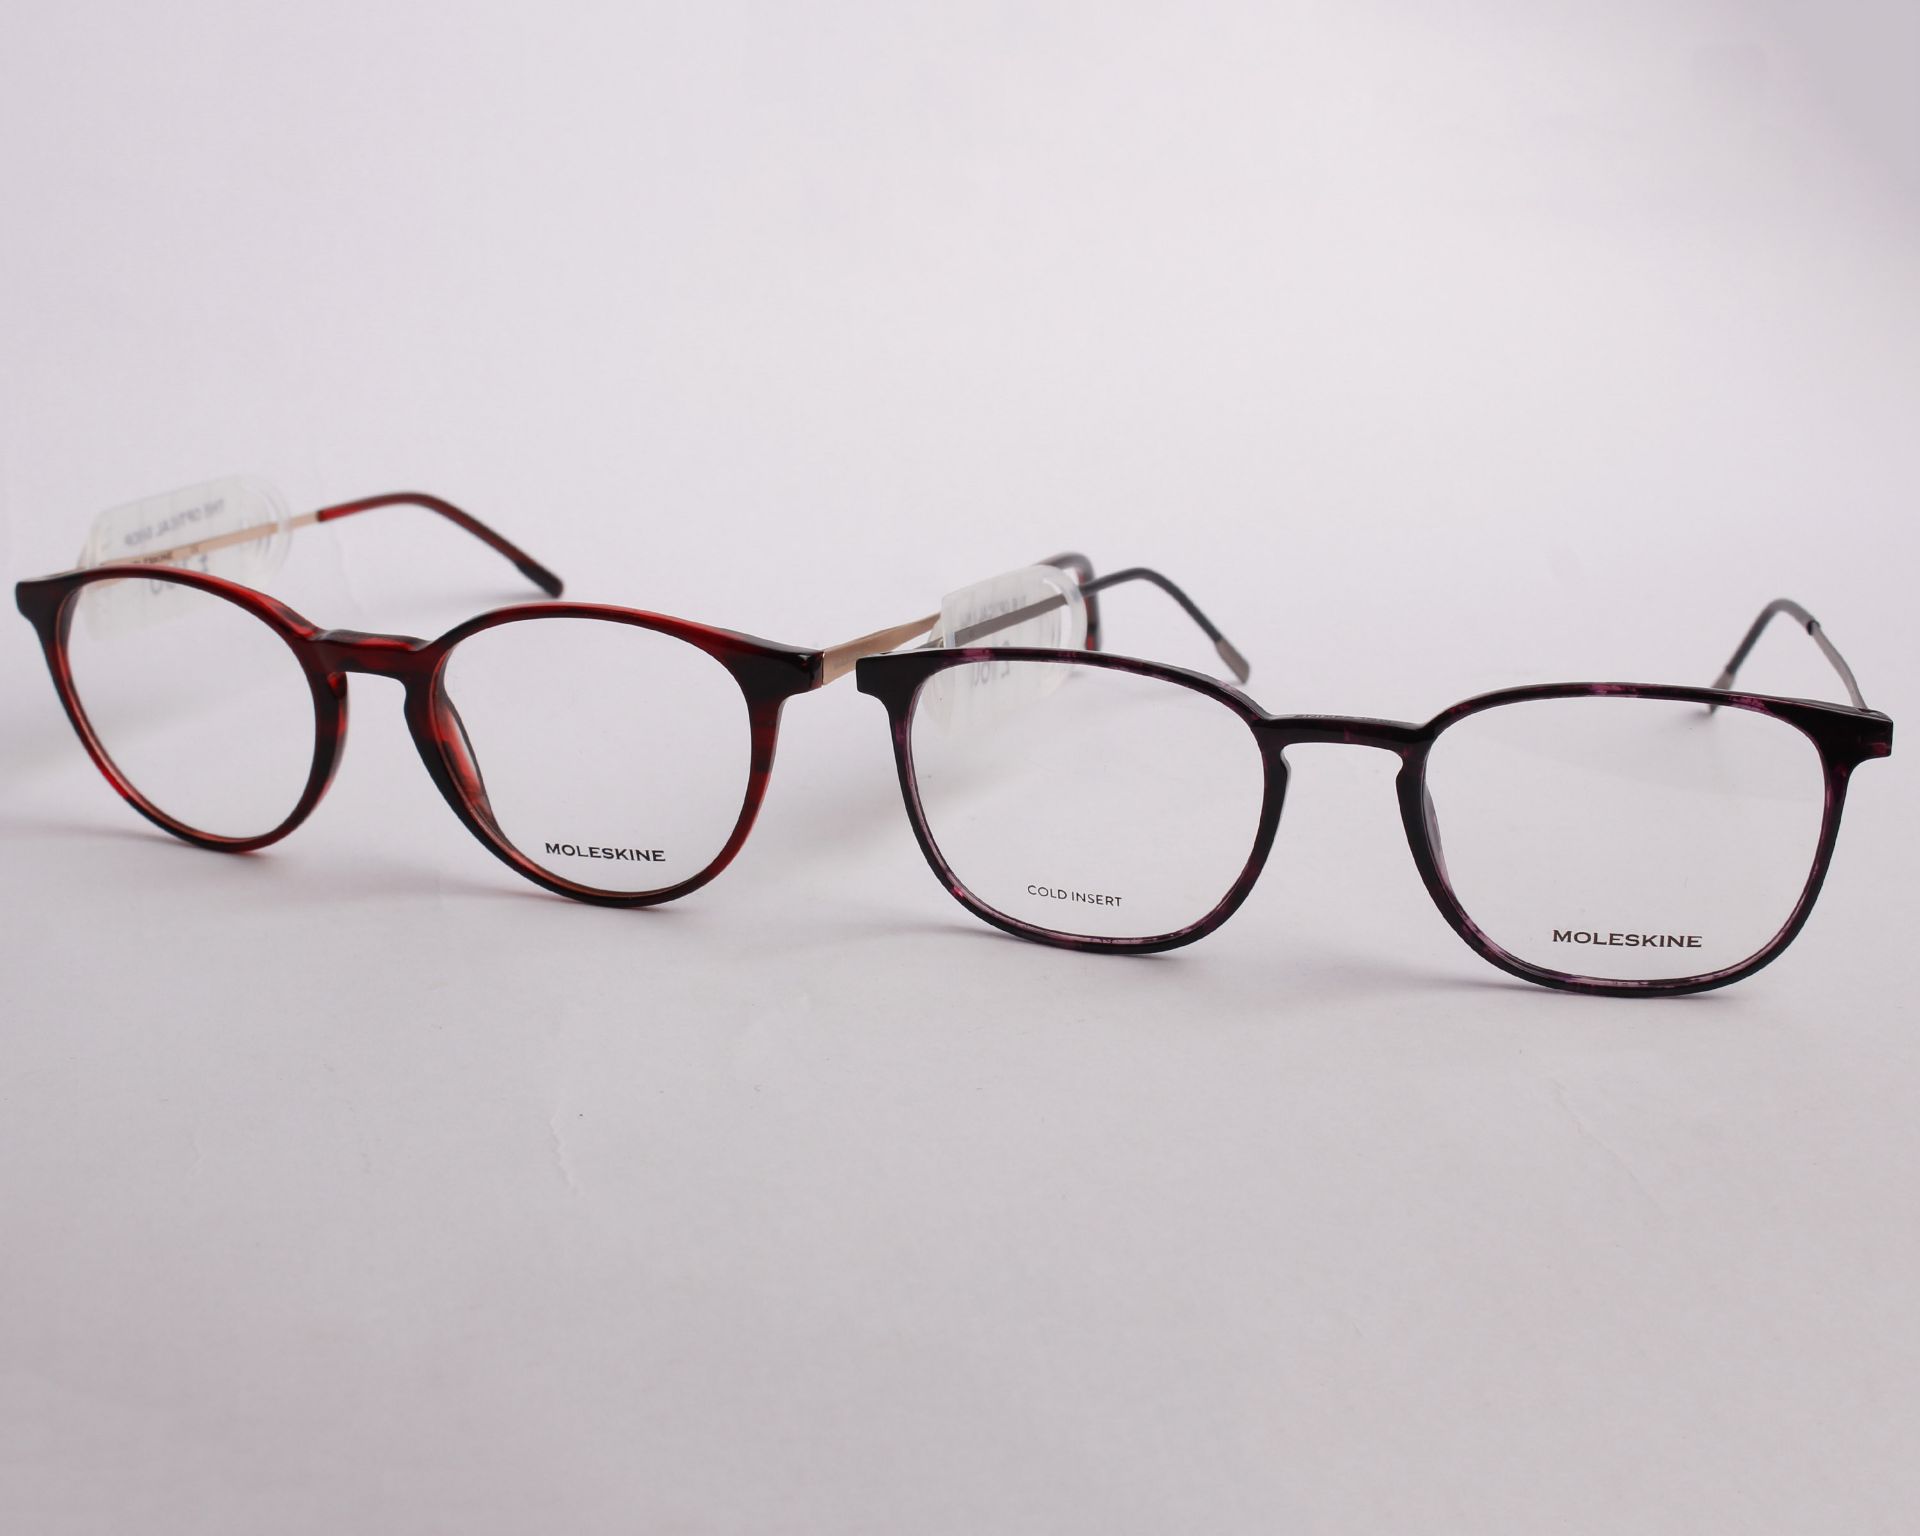 Two pairs of as new Moleskine glasses frames with clear glass (RRP £160 each).